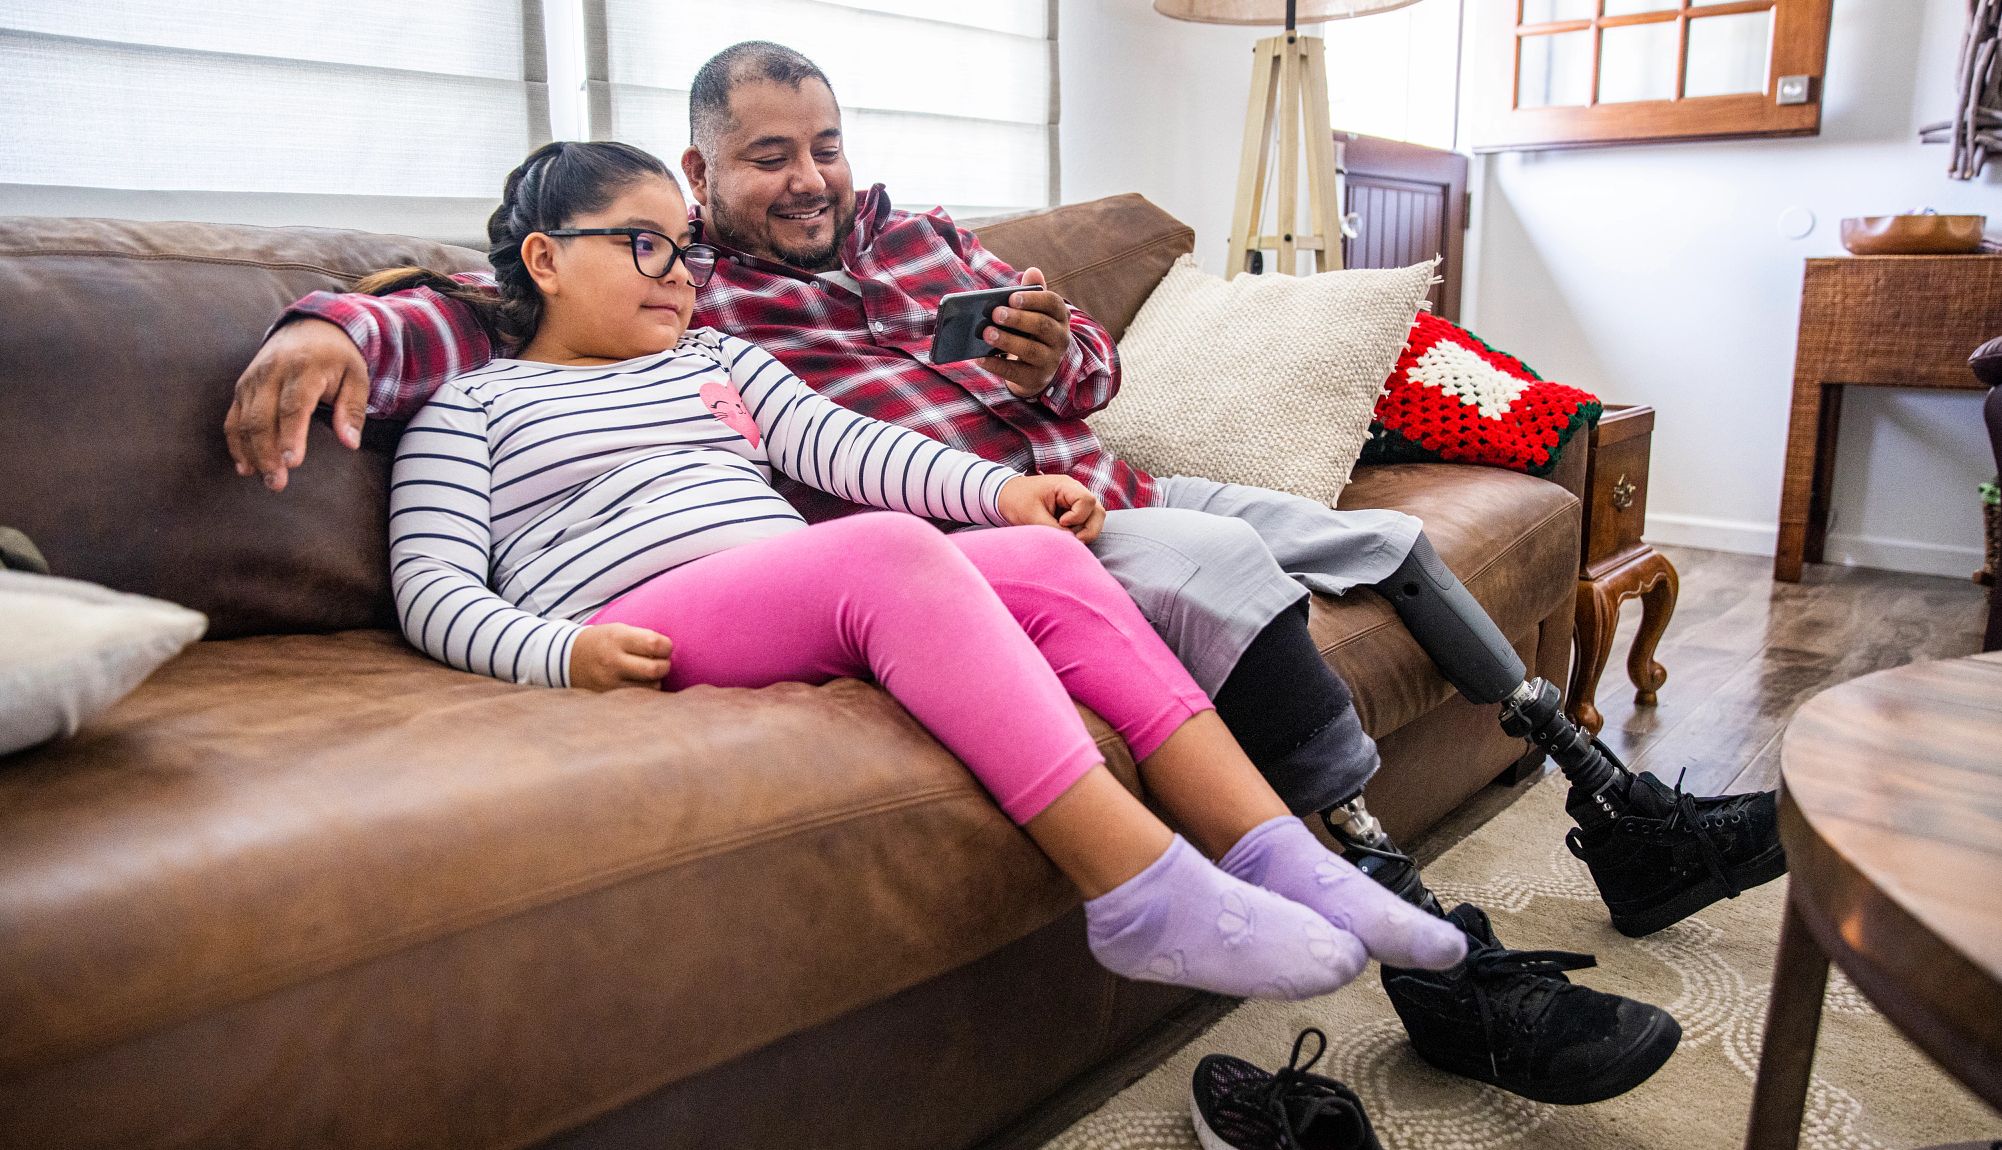 a man with prosthetic legs sits on a couch with a child, watching something on his smartphone